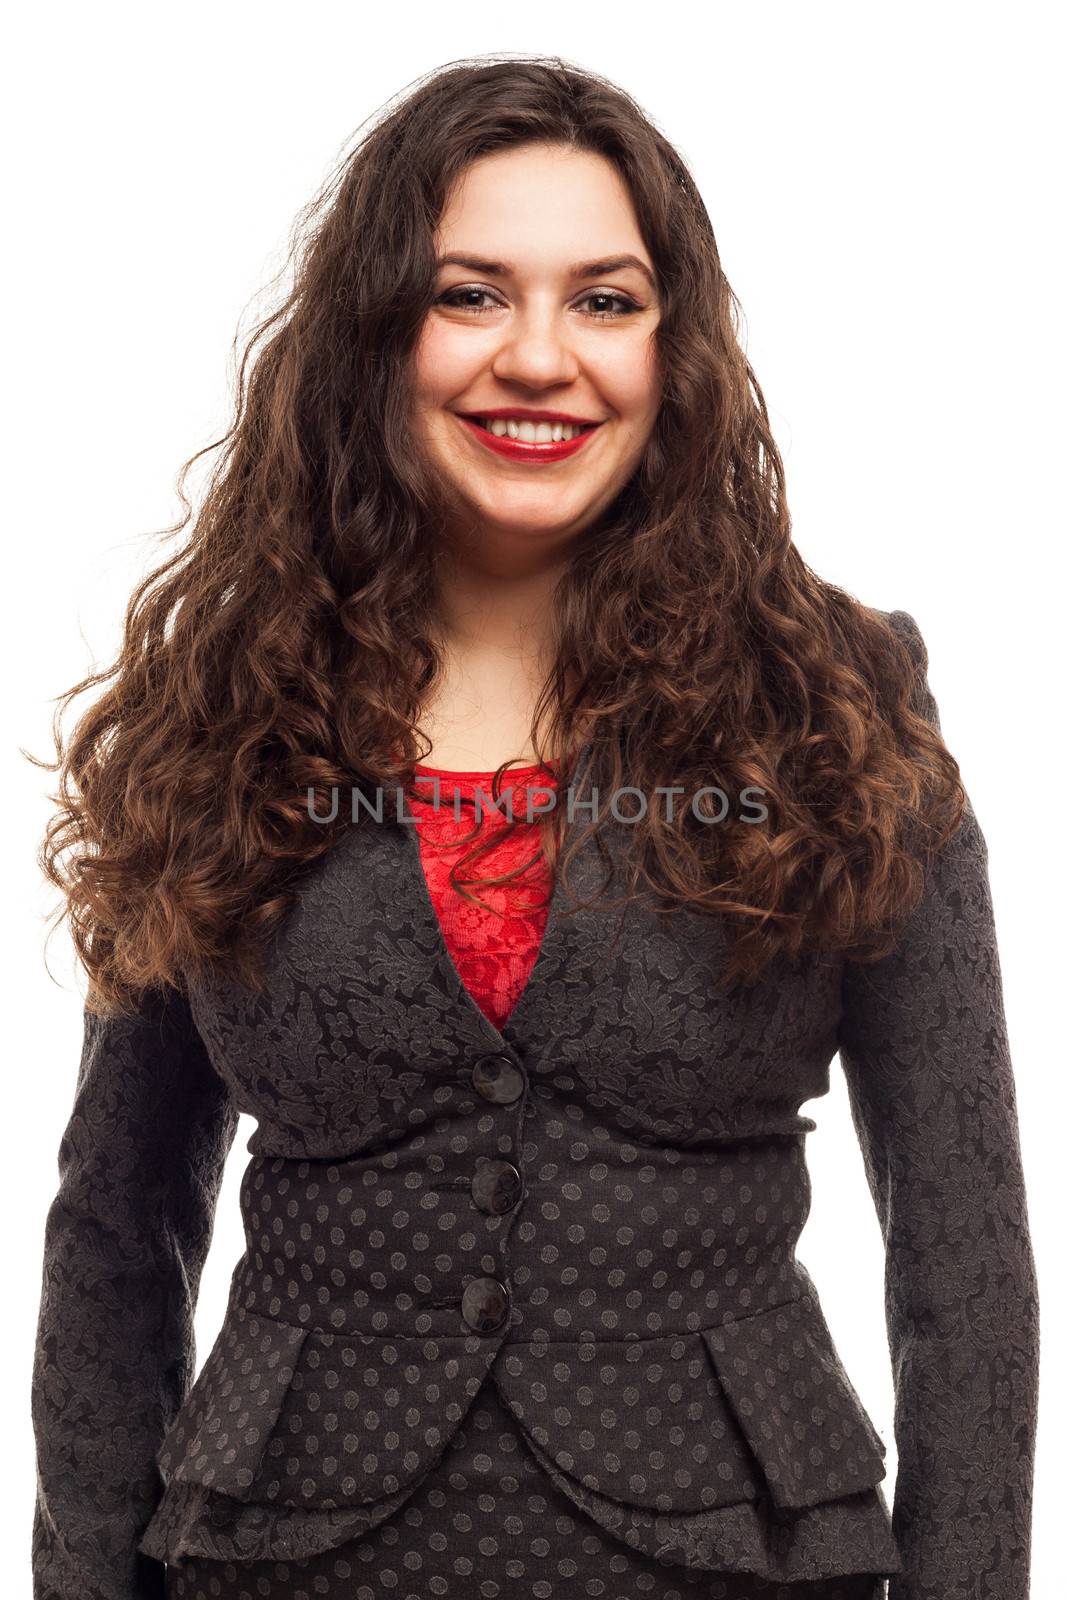 Confident business woman portrait isolated over a white background